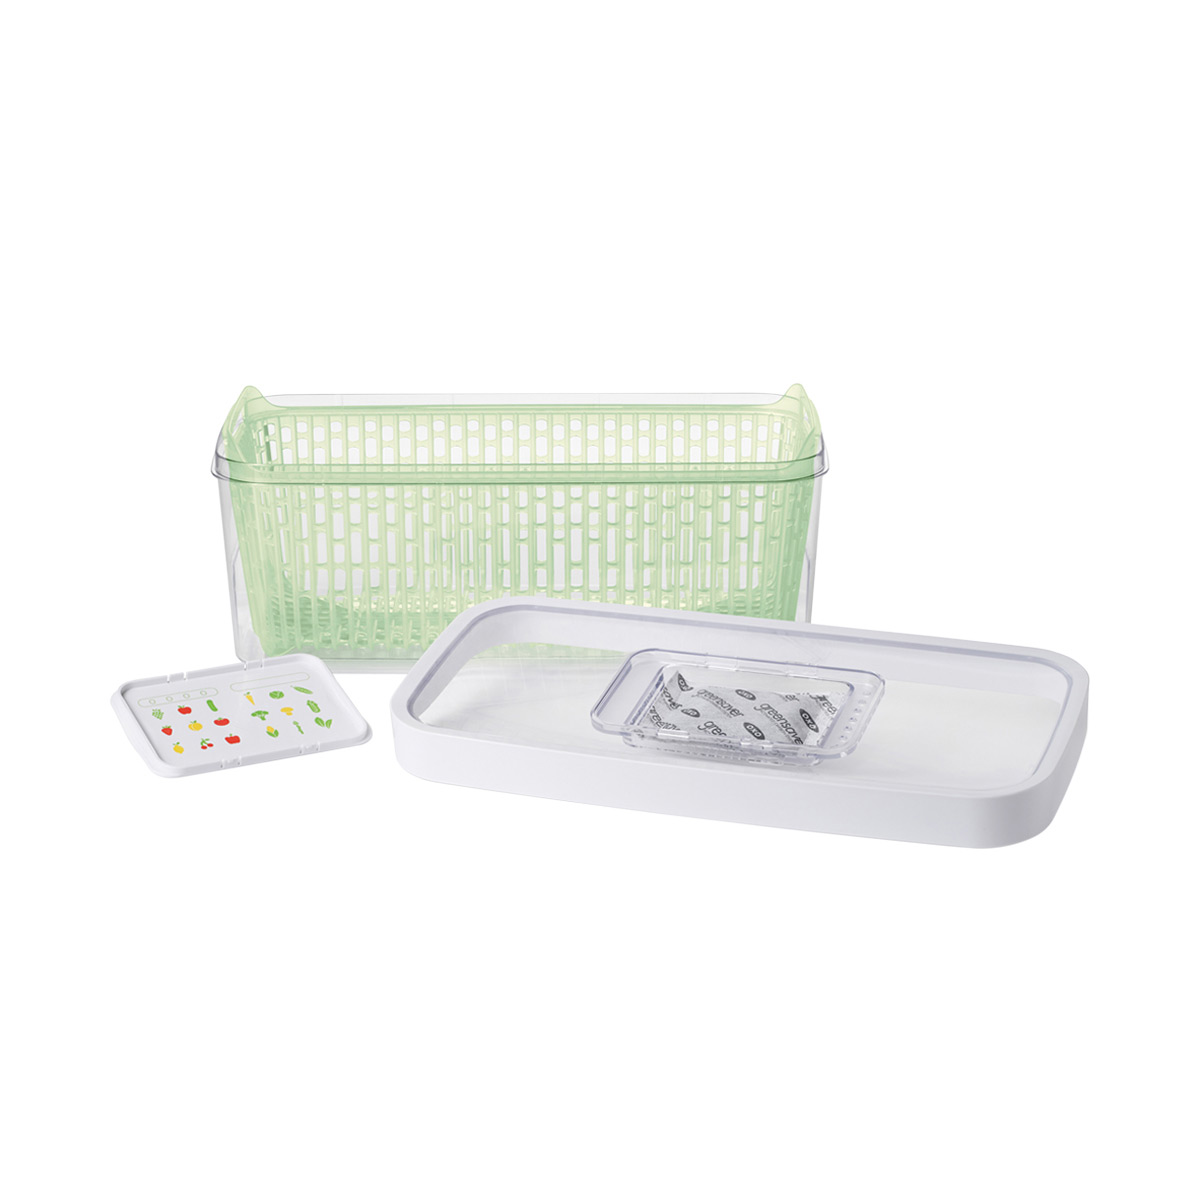 https://www.containerstore.com/catalogimages/342597/10066187-Greensaver-Produce-Keeper-5.jpg